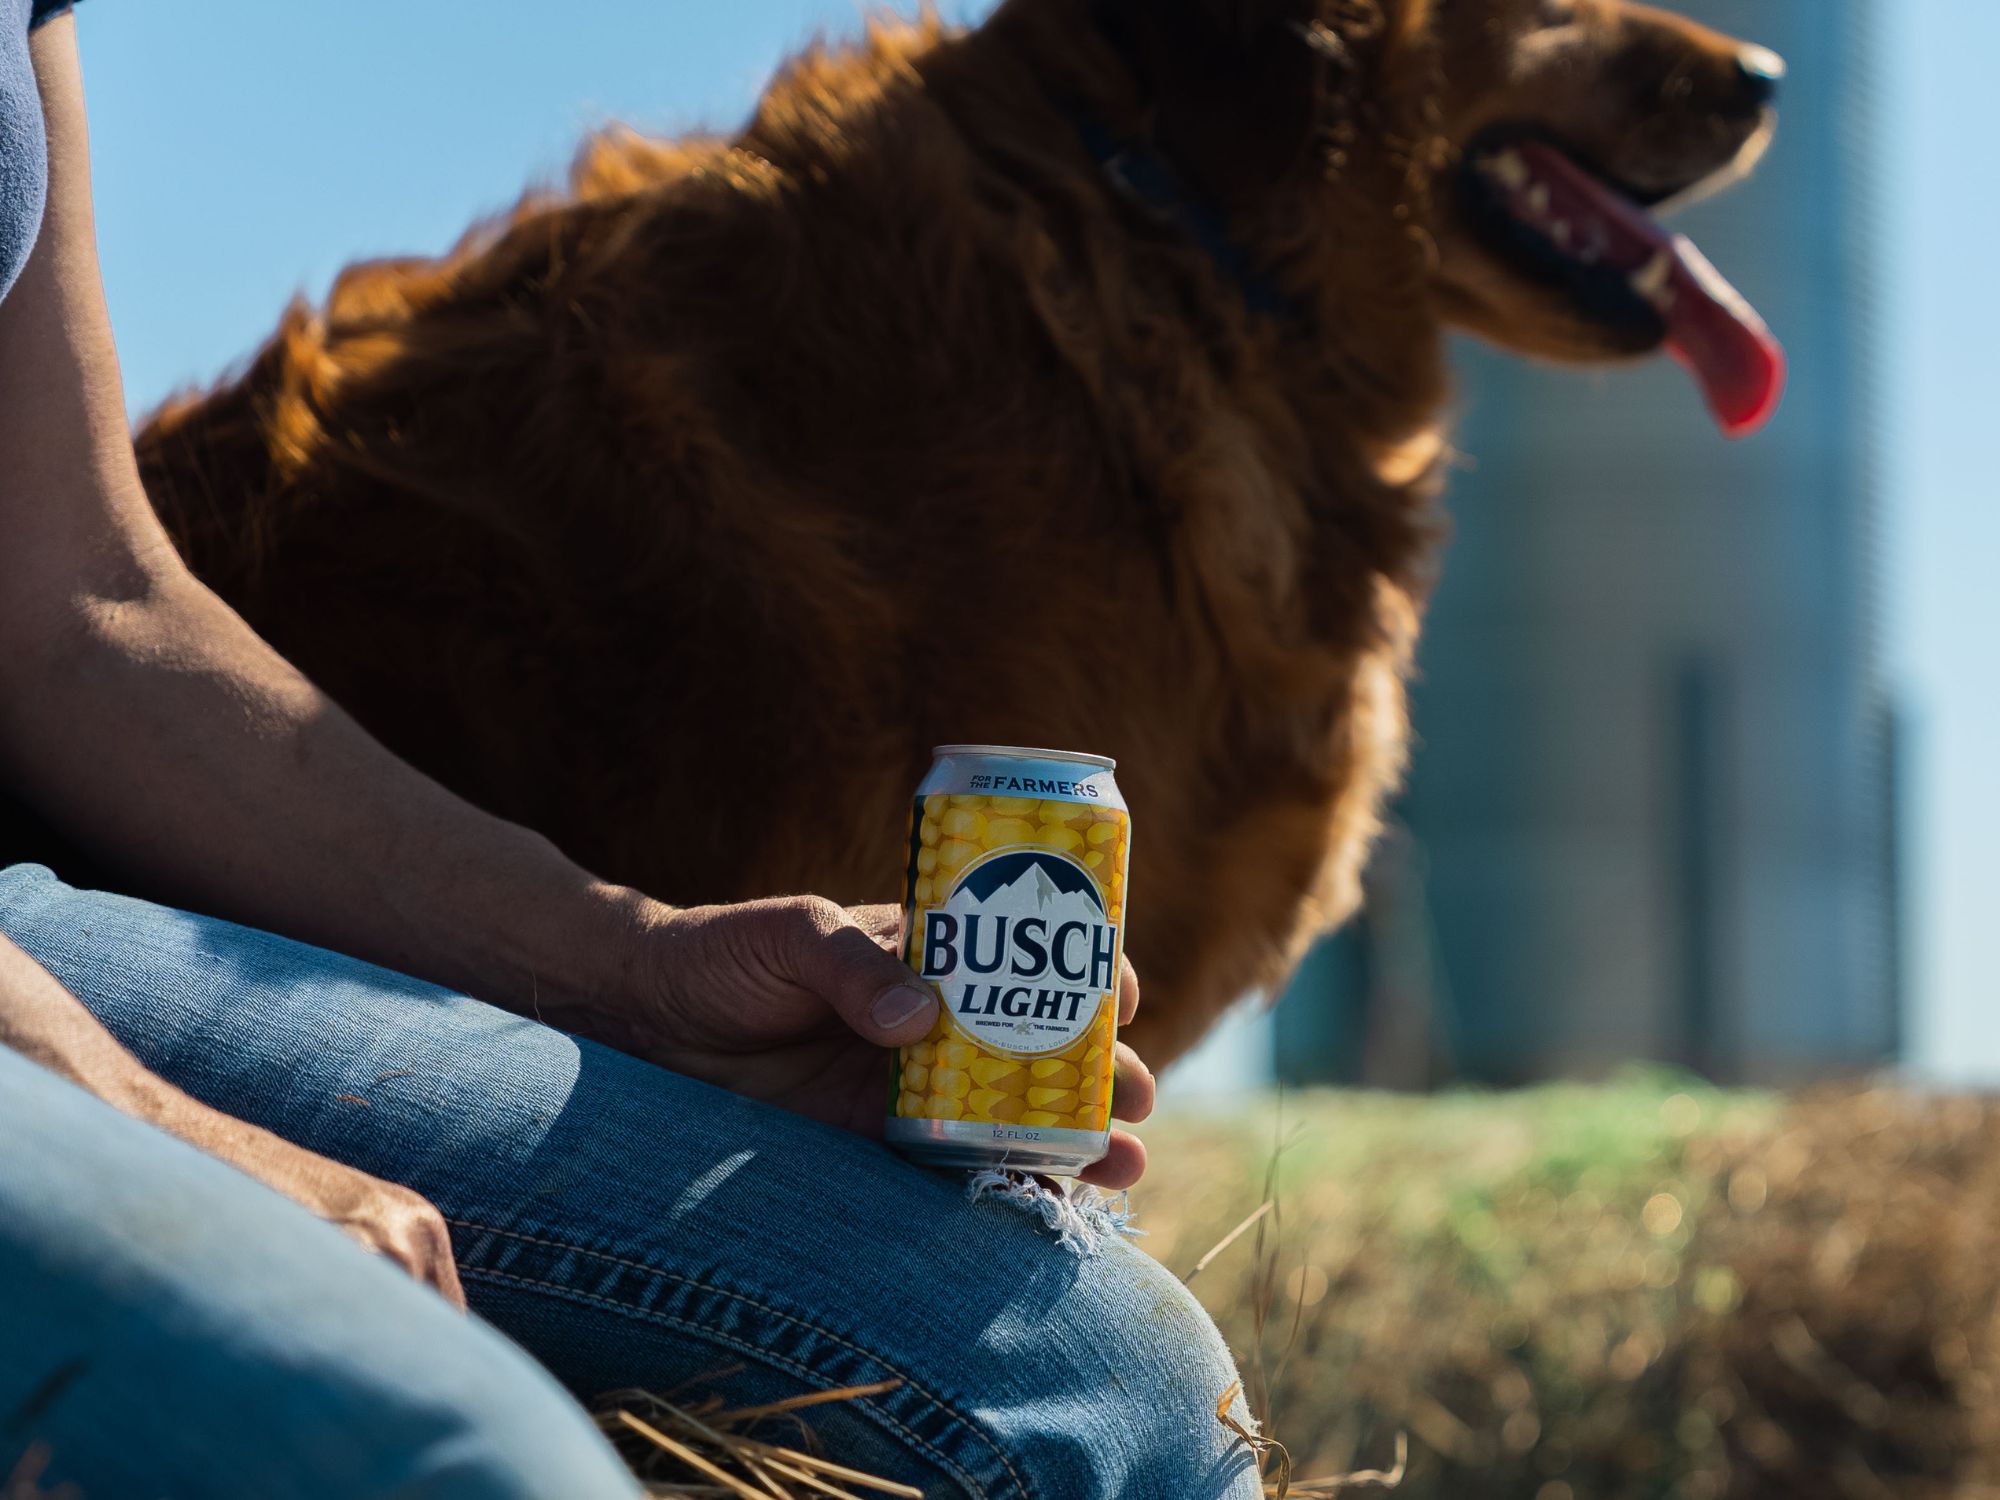 Busch Light releases a John Deere tractor beer can for Farm Rescue